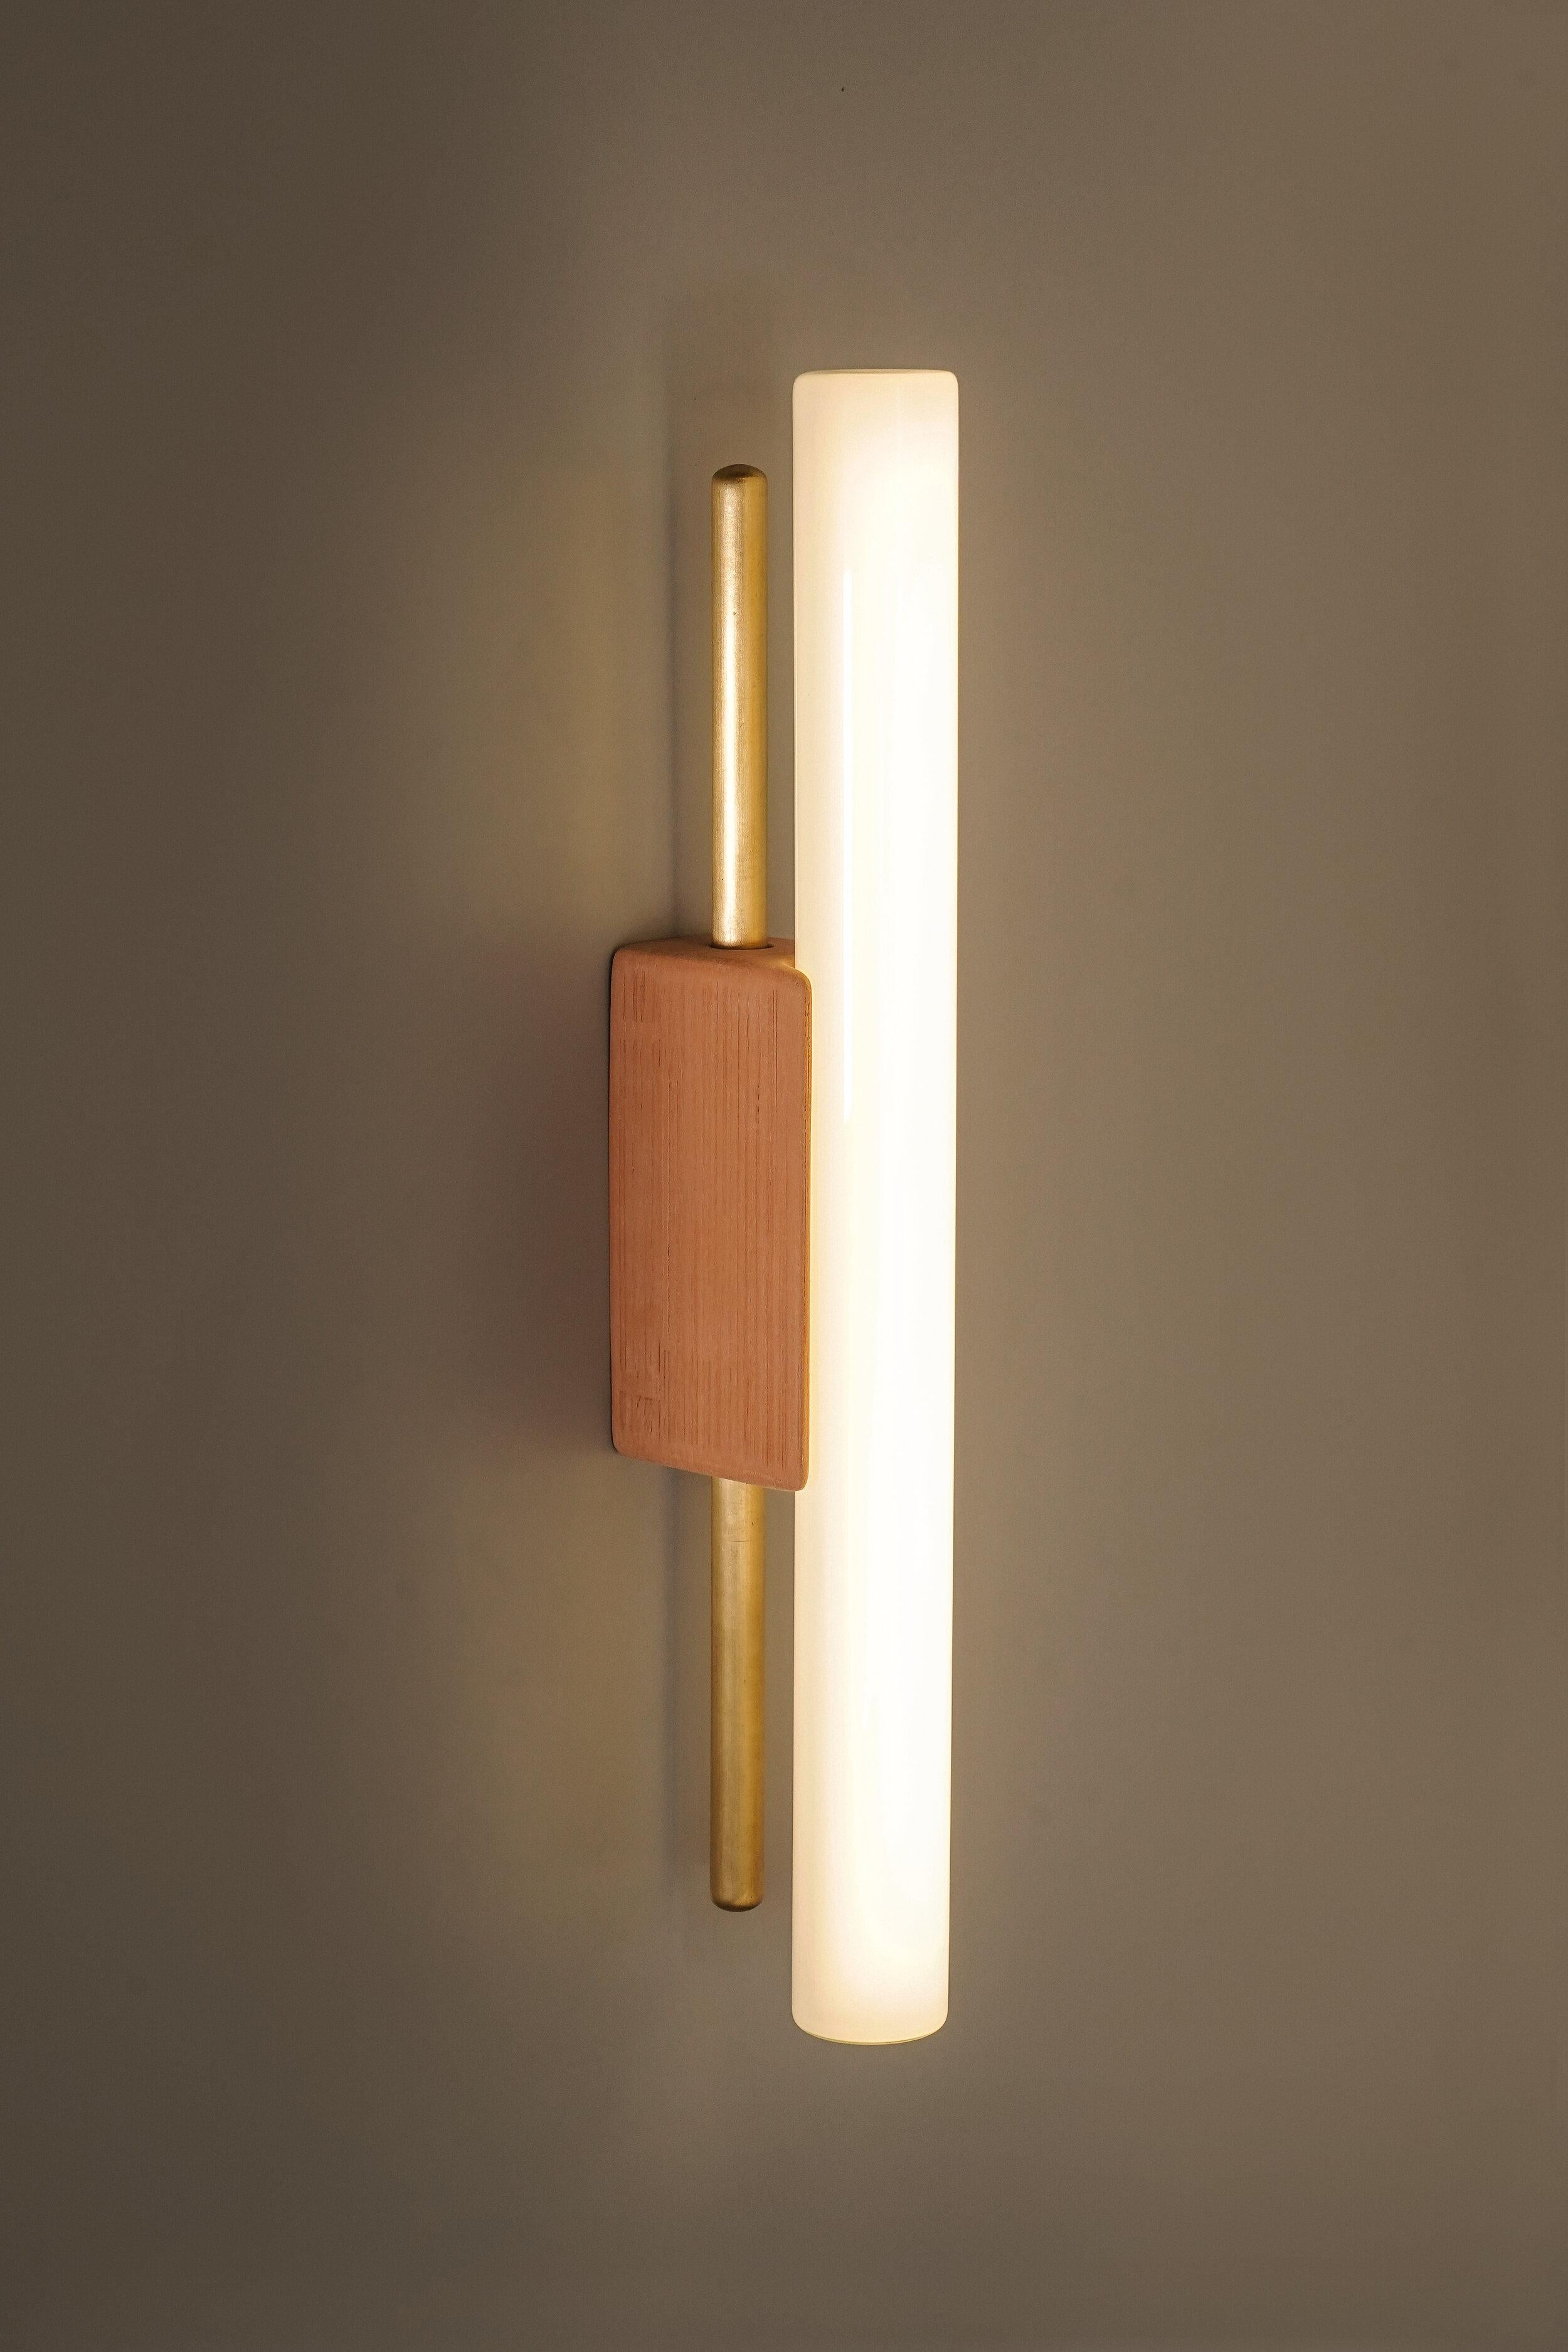 Tubus 30 wall light by Contain
Dimensions: D 3.2 x W 30 x H 7.5cm 
Materials: brass and 3D printed PLA structure.
Available in different finishes.

All our lamps can be wired according to each country. If sold to the USA it will be wired for